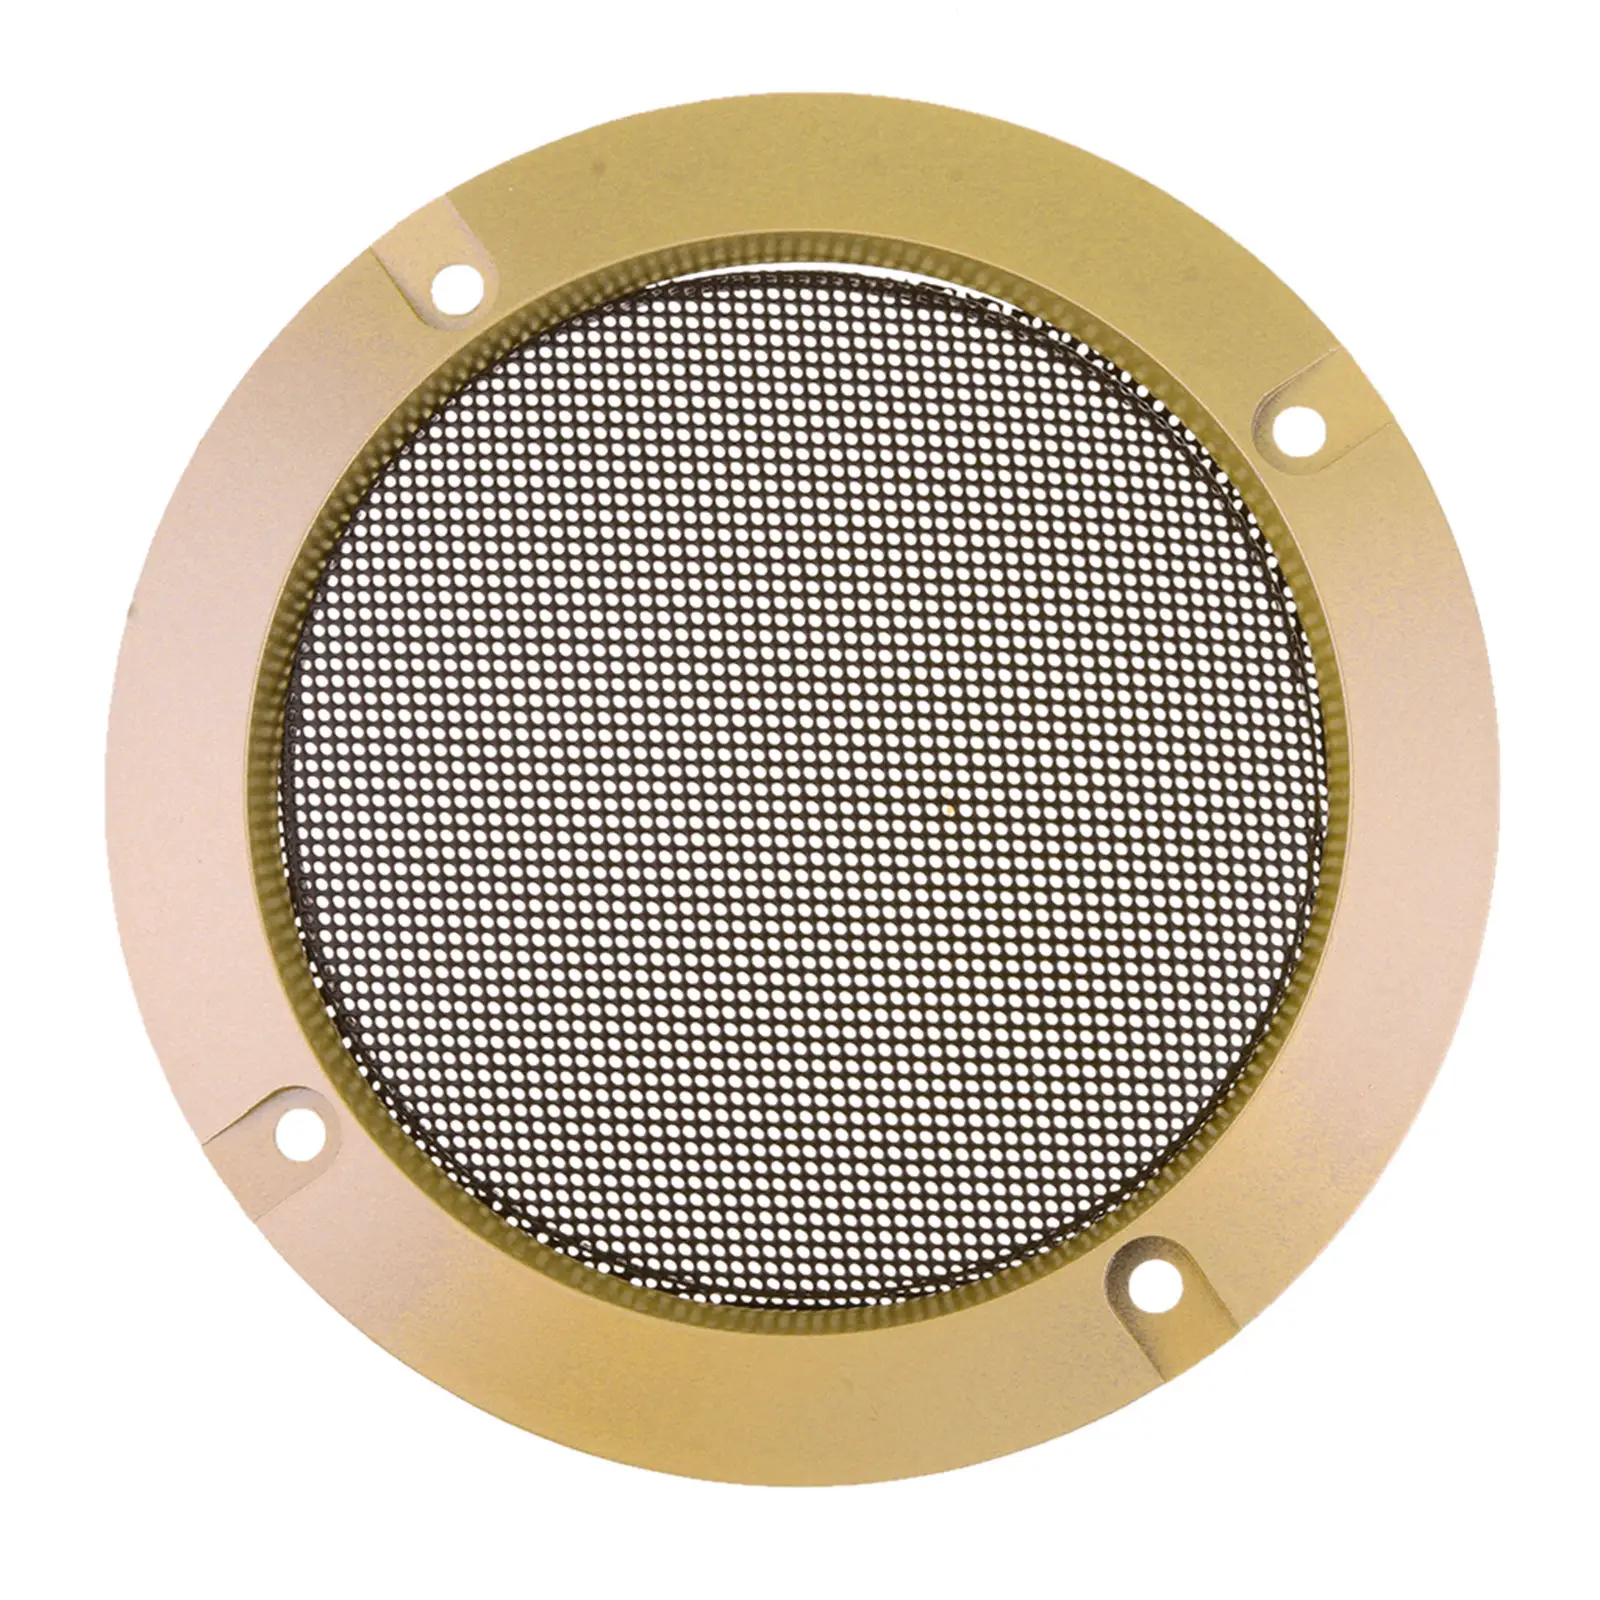 4 Inch Speaker Grills Cover Case with 4 pcs Screws for Speaker Mounting Home Audio DIY -124mm Outer Diameter Gold